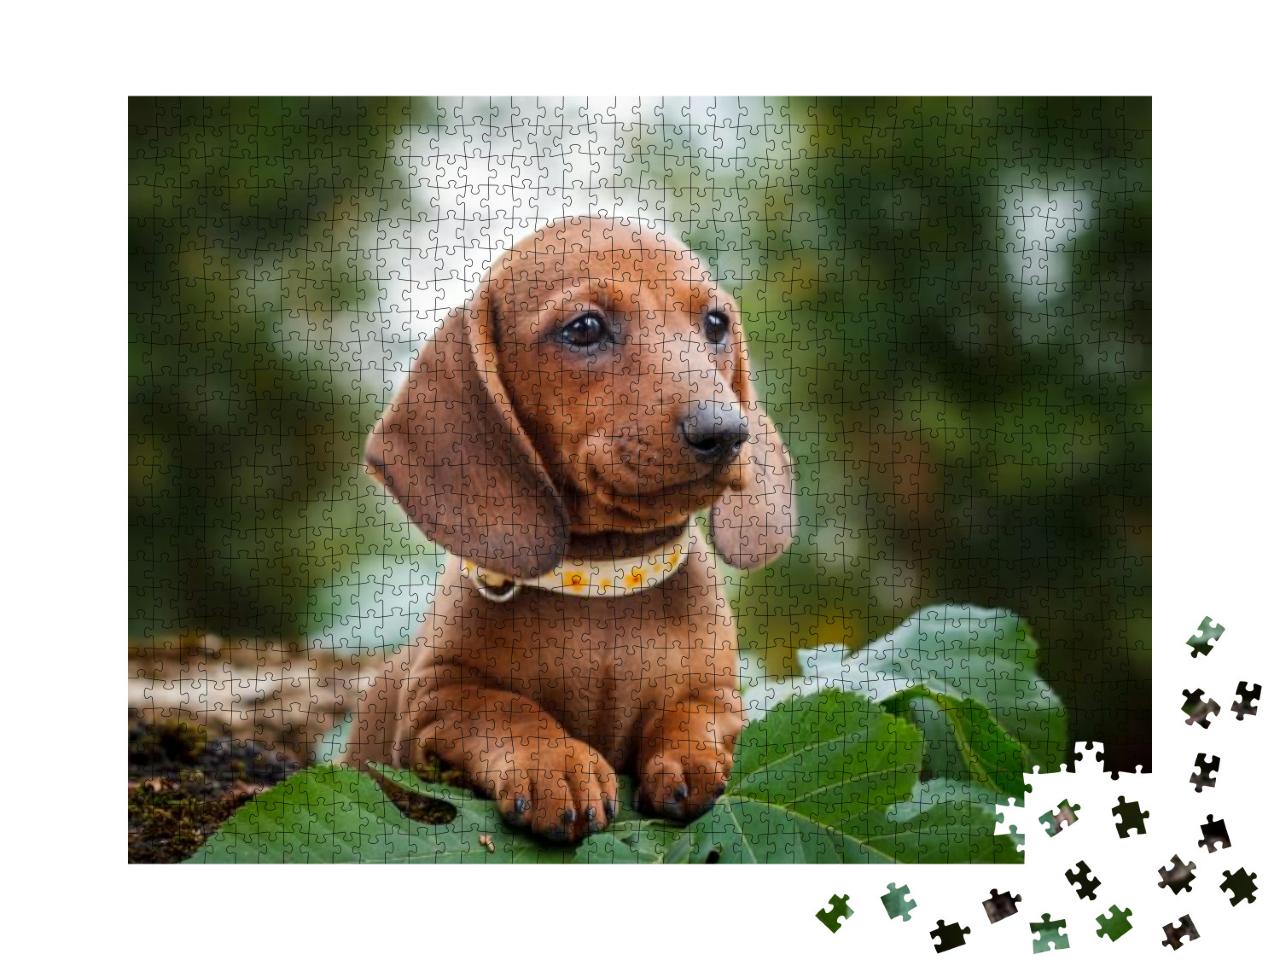 Cute Dachshunds Puppy with Nature Background... Jigsaw Puzzle with 1000 pieces